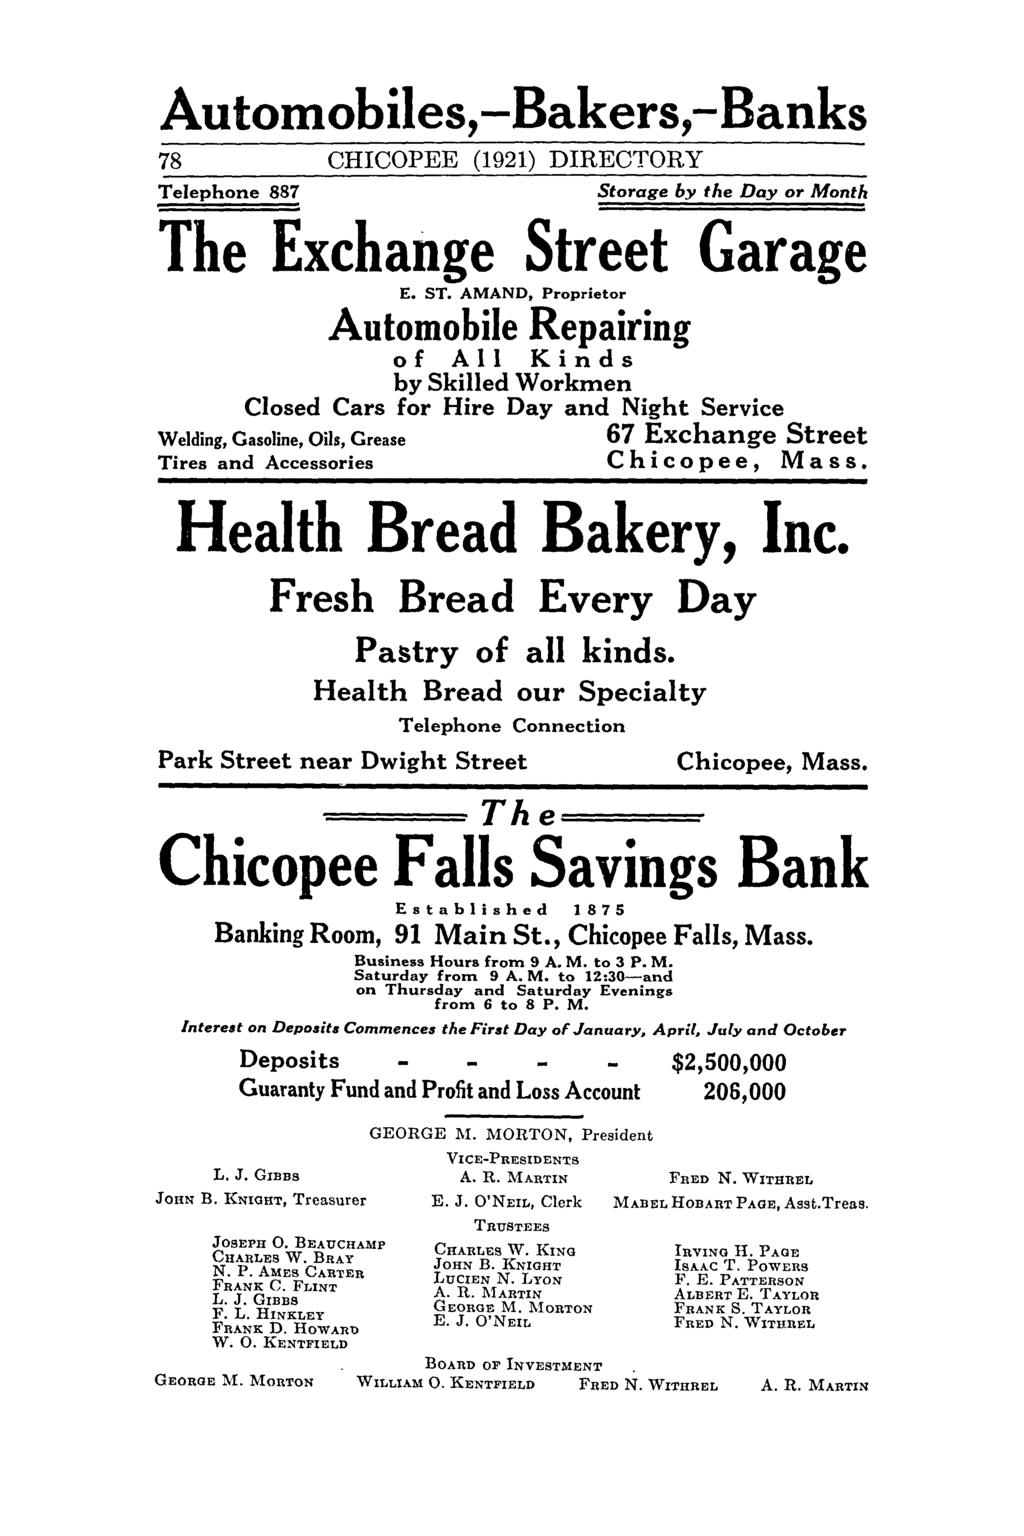 AutoInobiles,-Bakers,-Banks 78 CHICOPEE (1921) DIRECTORY Telephone 887 Storage by the Day or Month The Exchange Street Garage E. ST.